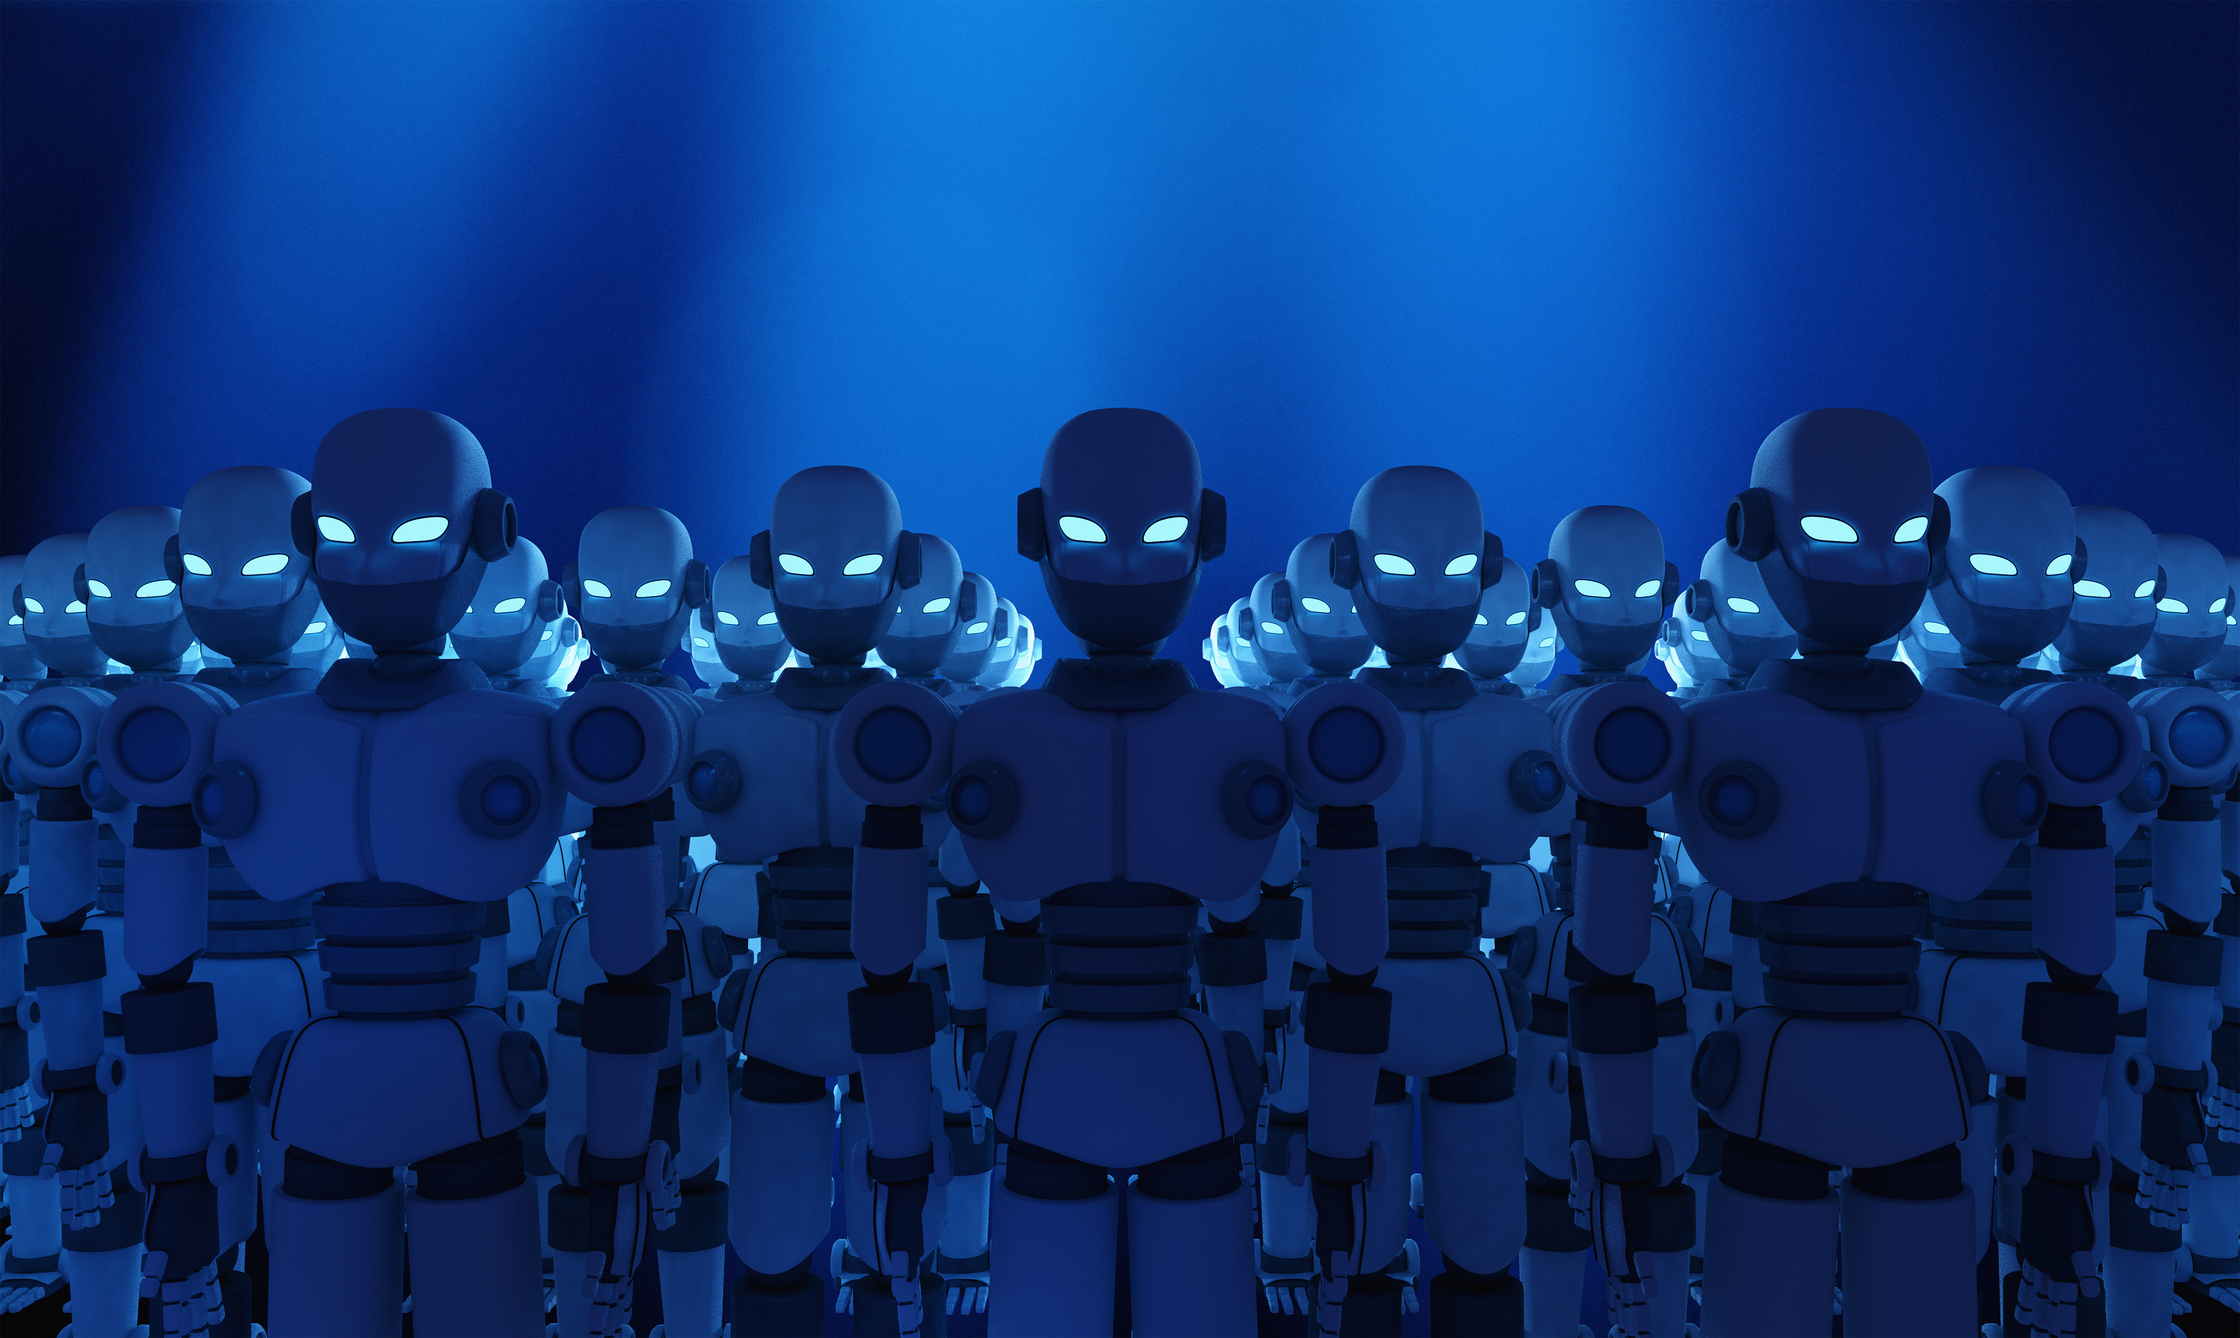 Group of robots on blue background, artificial intelligence in